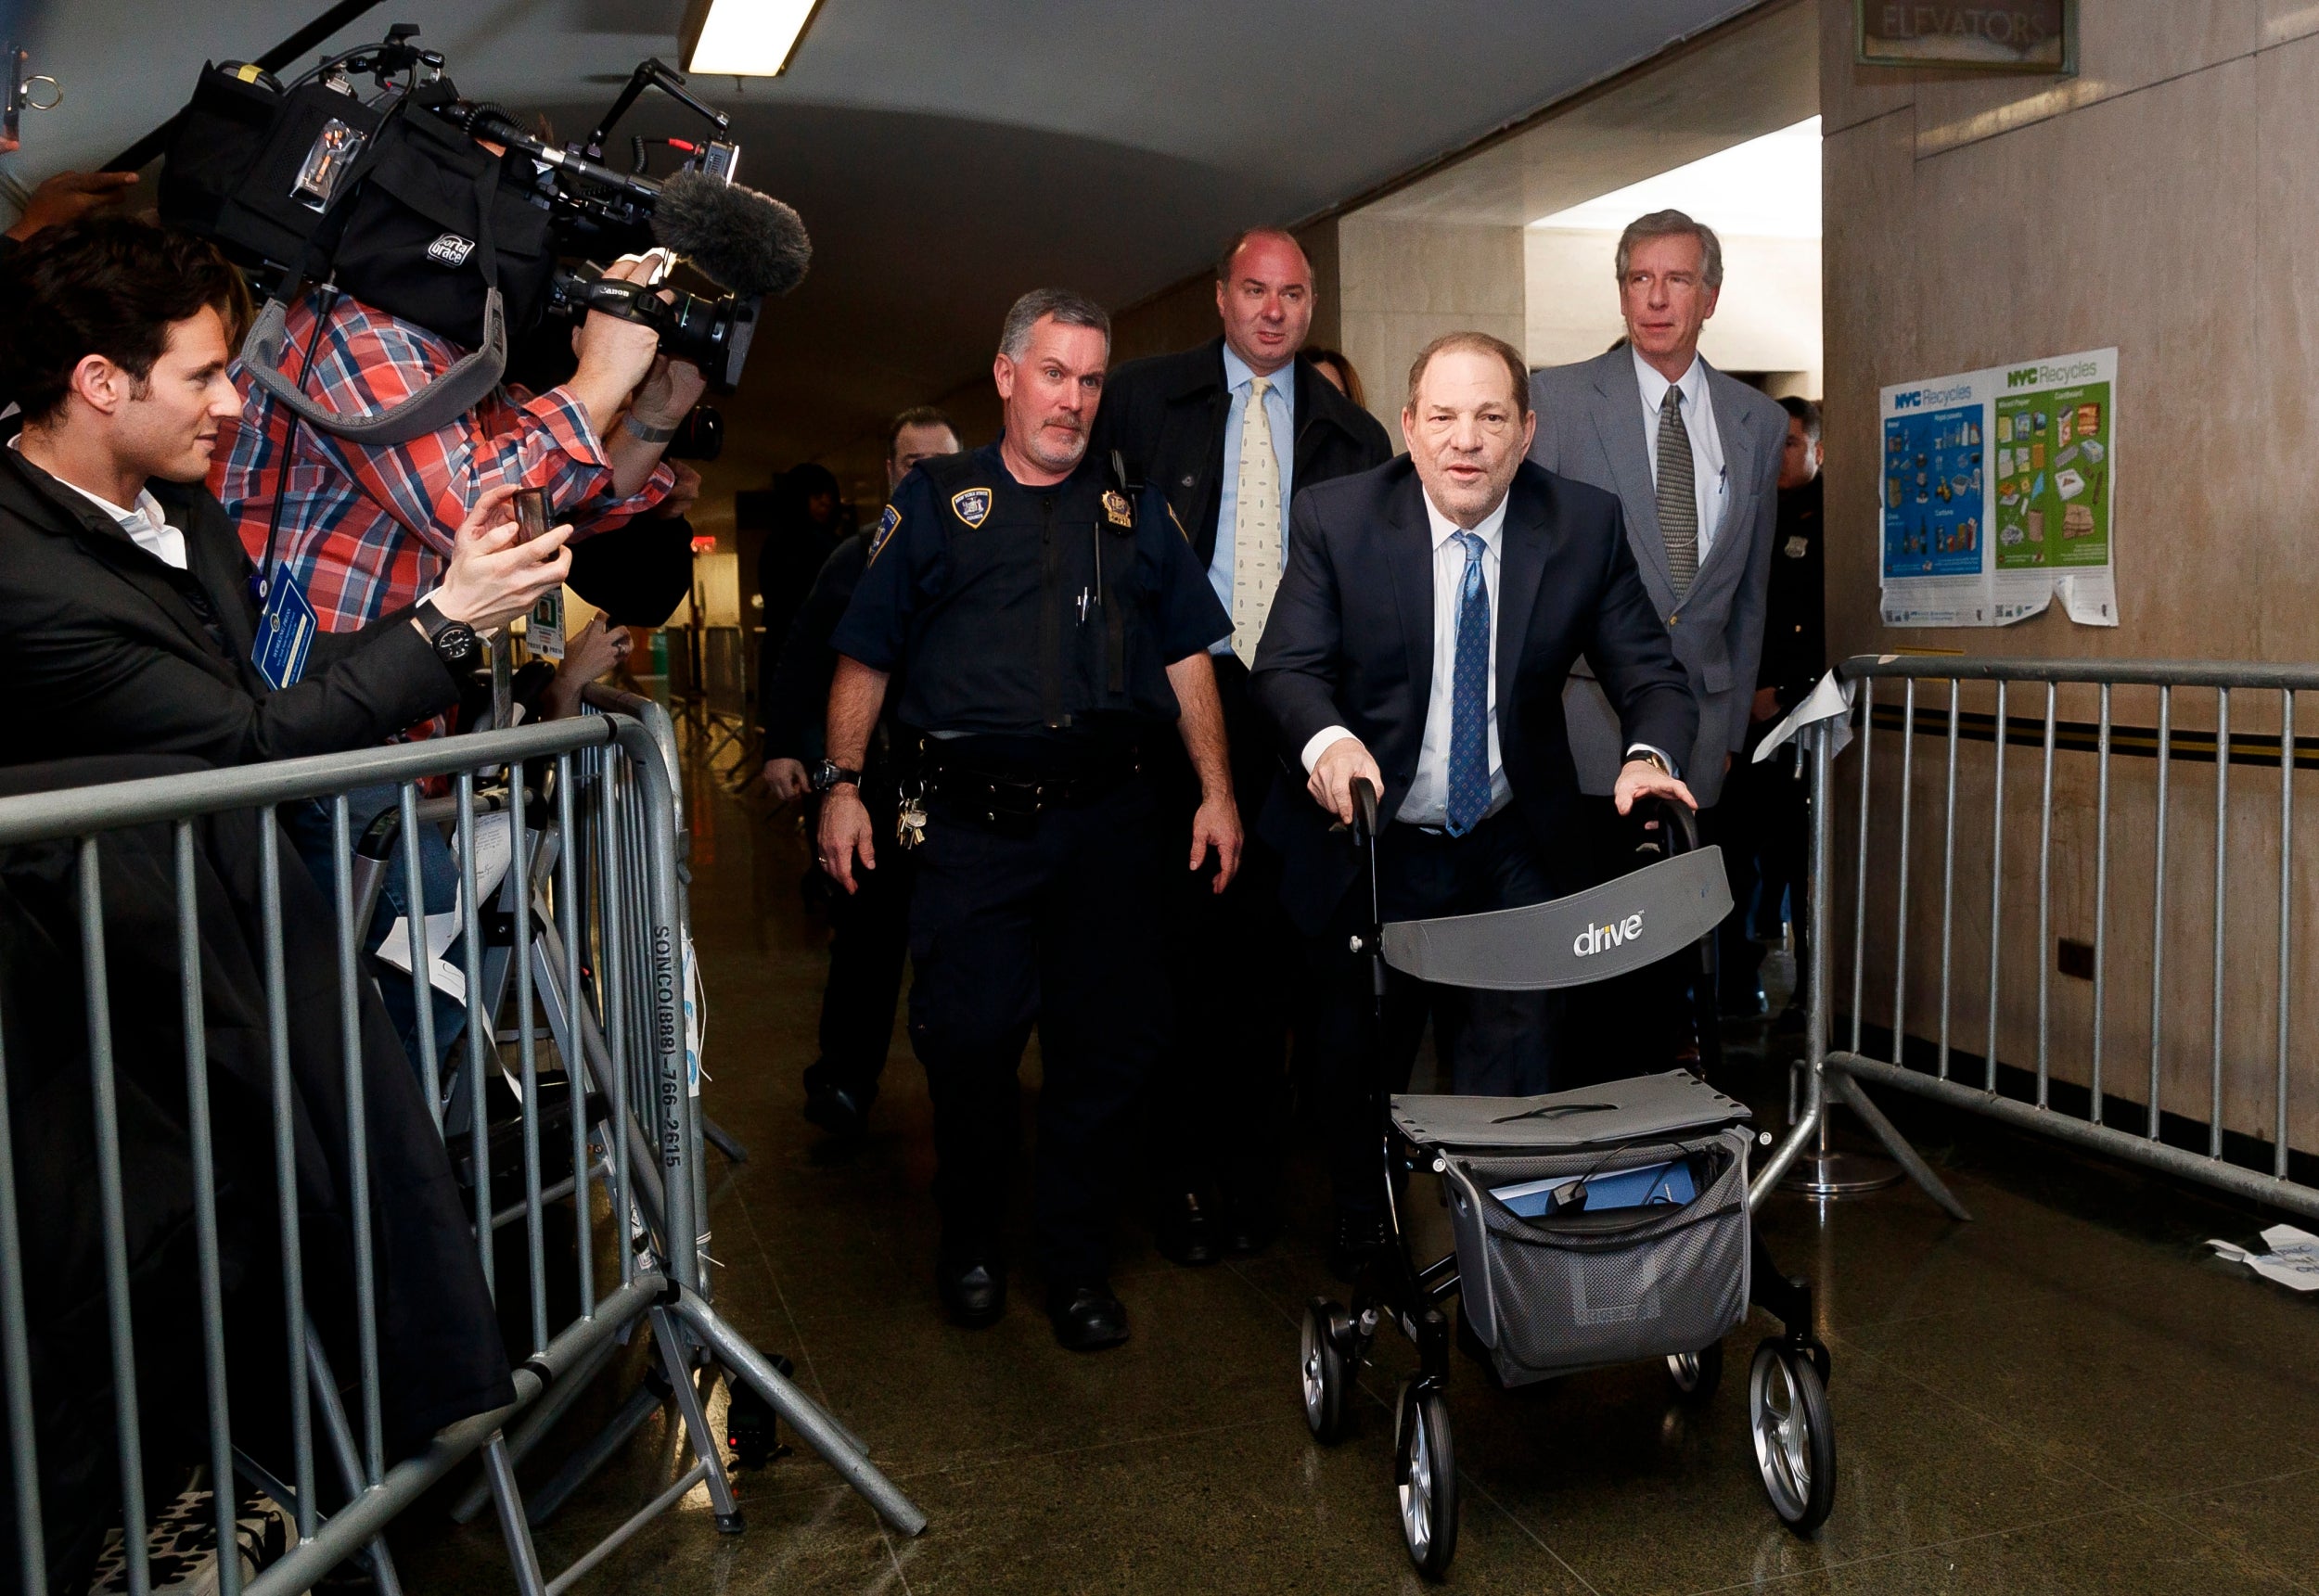 The film producer arrives at court in New York